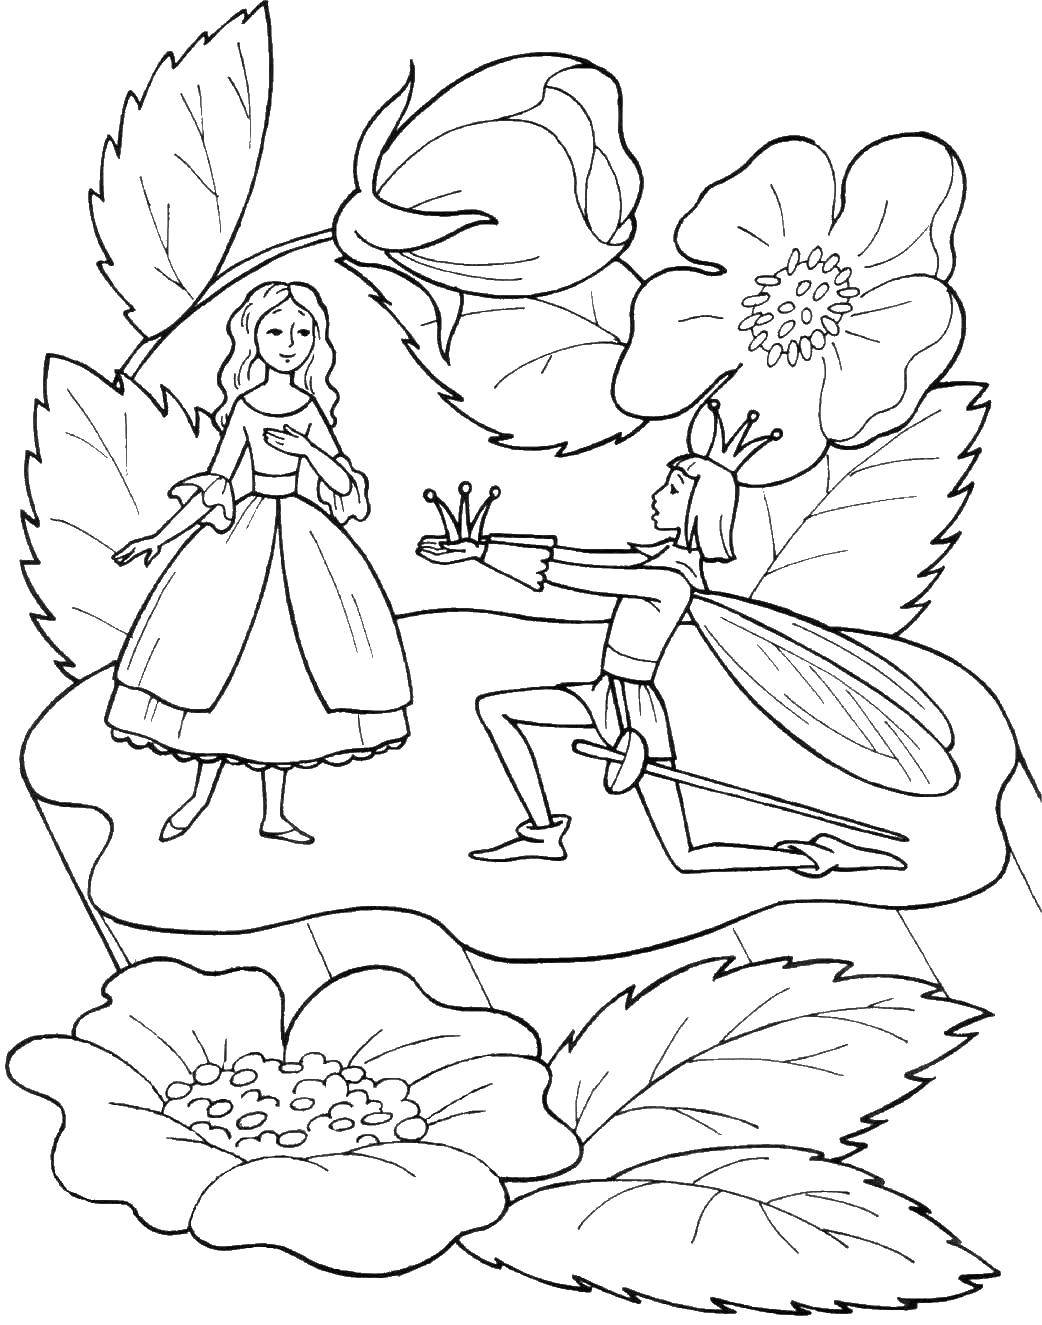 Coloring The tale of Thumbelina. Category Fairy tales. Tags:  Tale, Thumbelina.